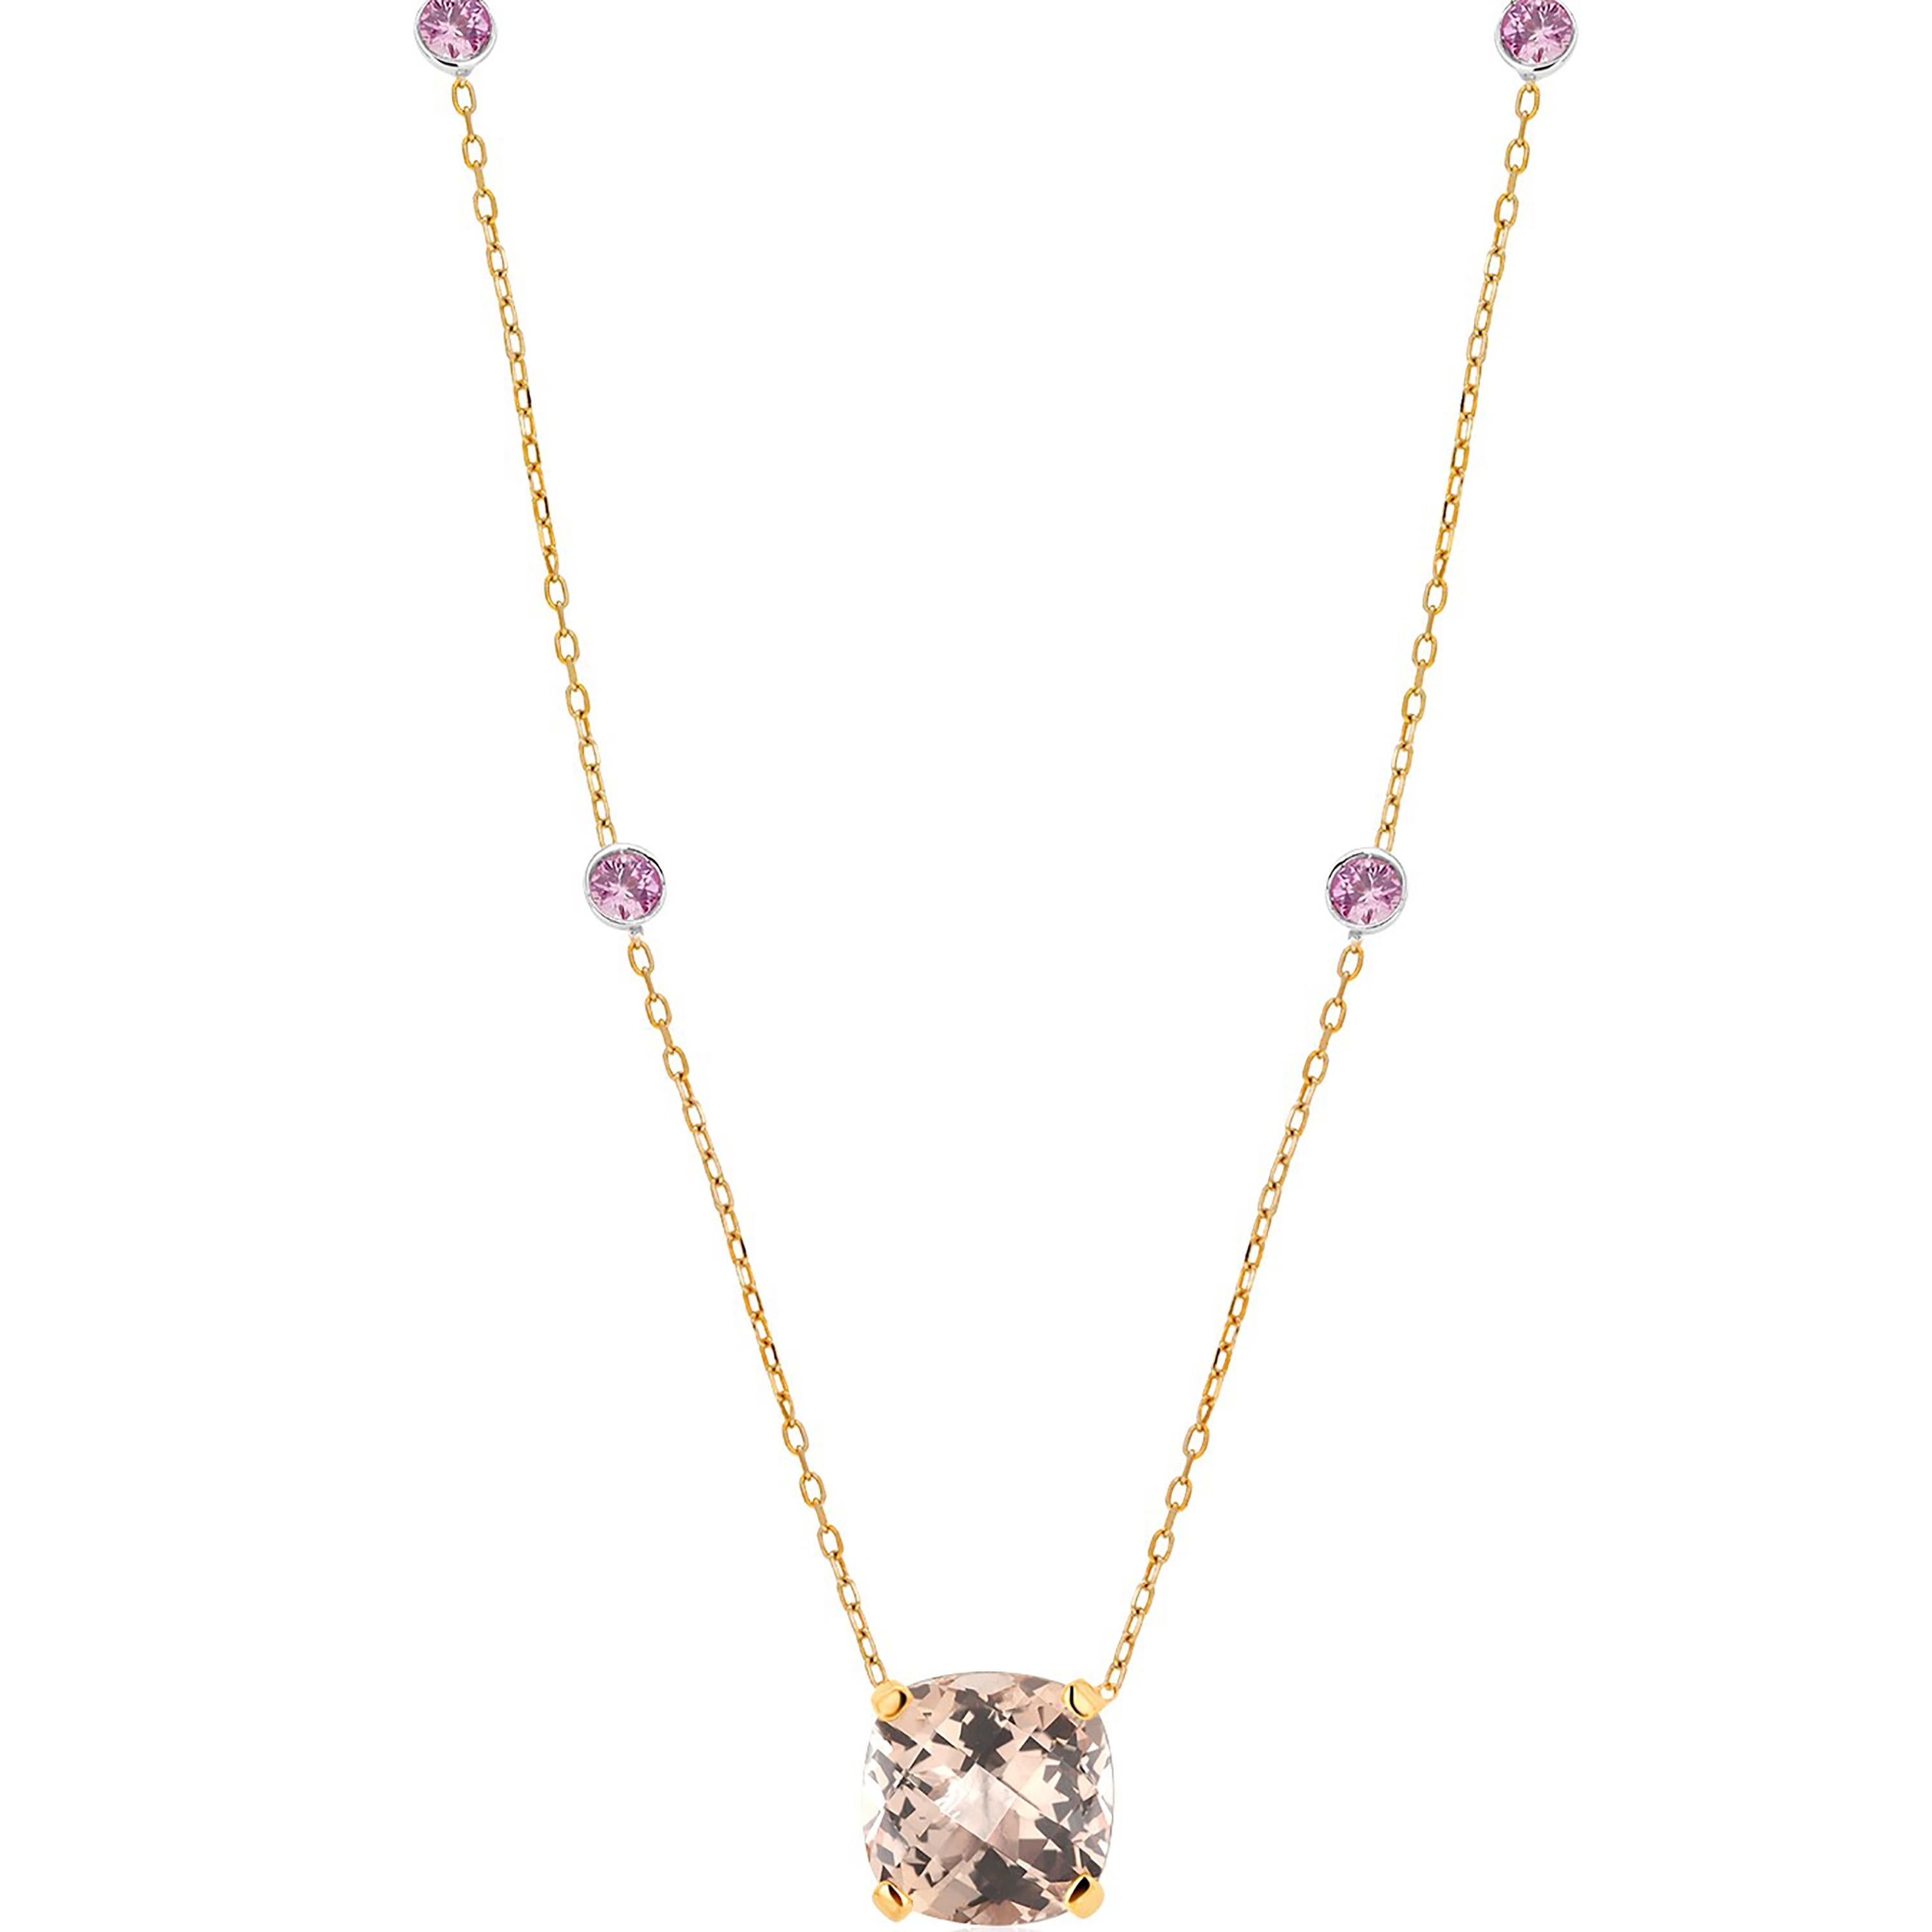 Antique Cushion Cut Cushion Shape Morganite Pink Sapphire Yellow and White Gold Pendant Necklace